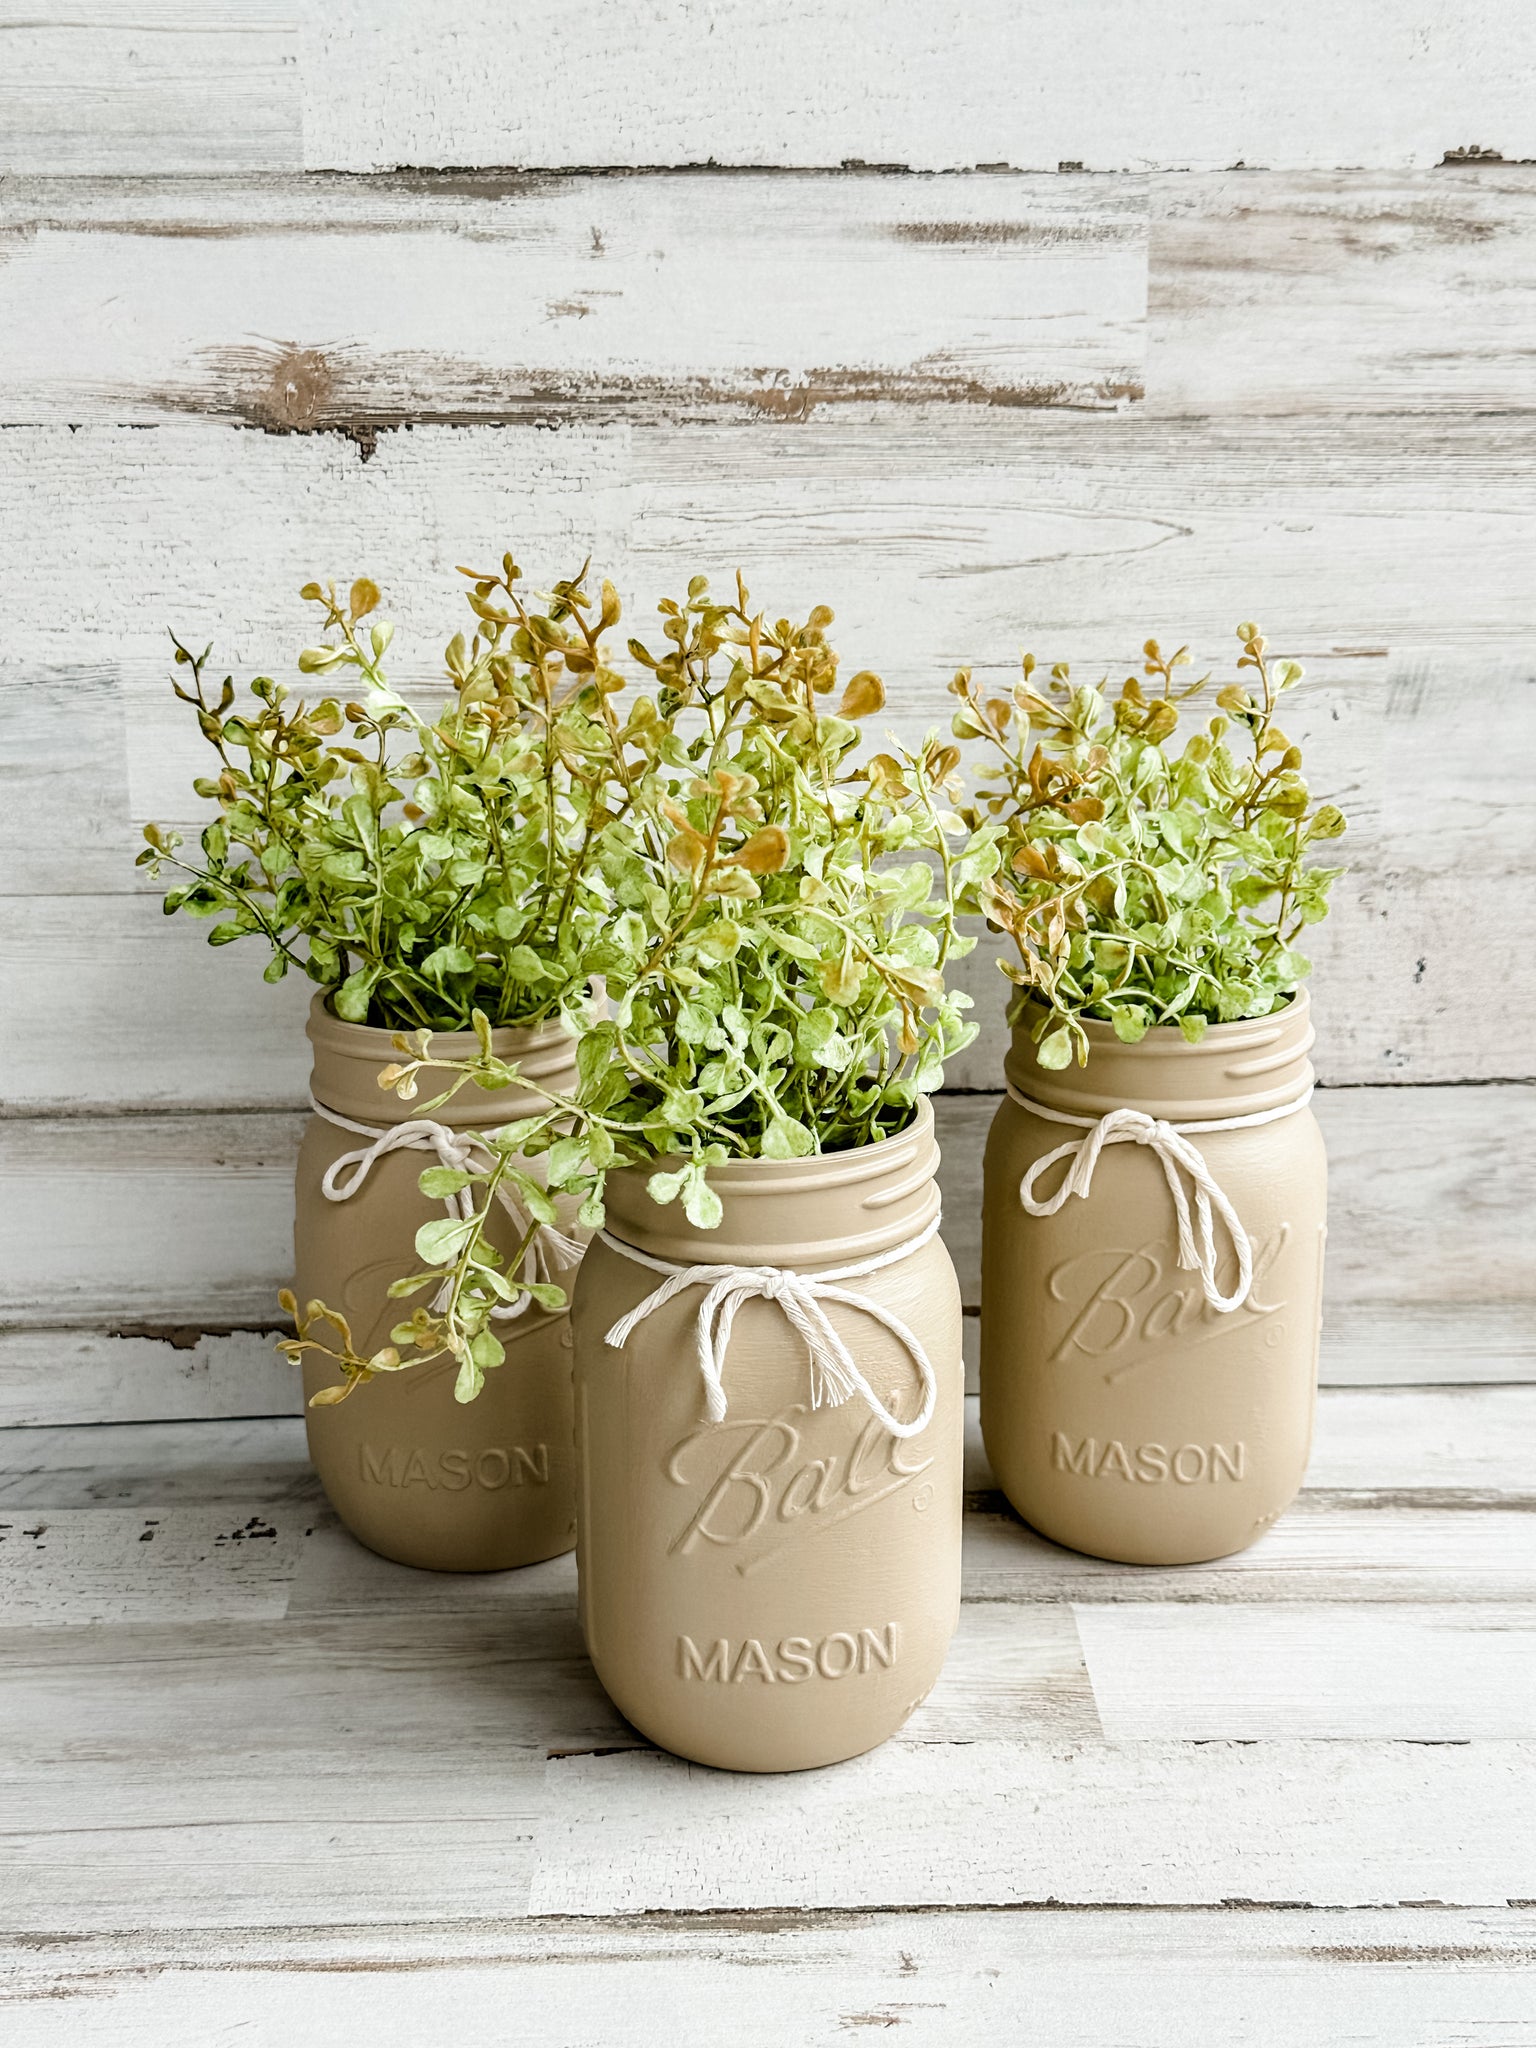 Eastland Small Mason Jar with Handle Set of 6 - Save-On-Crafts